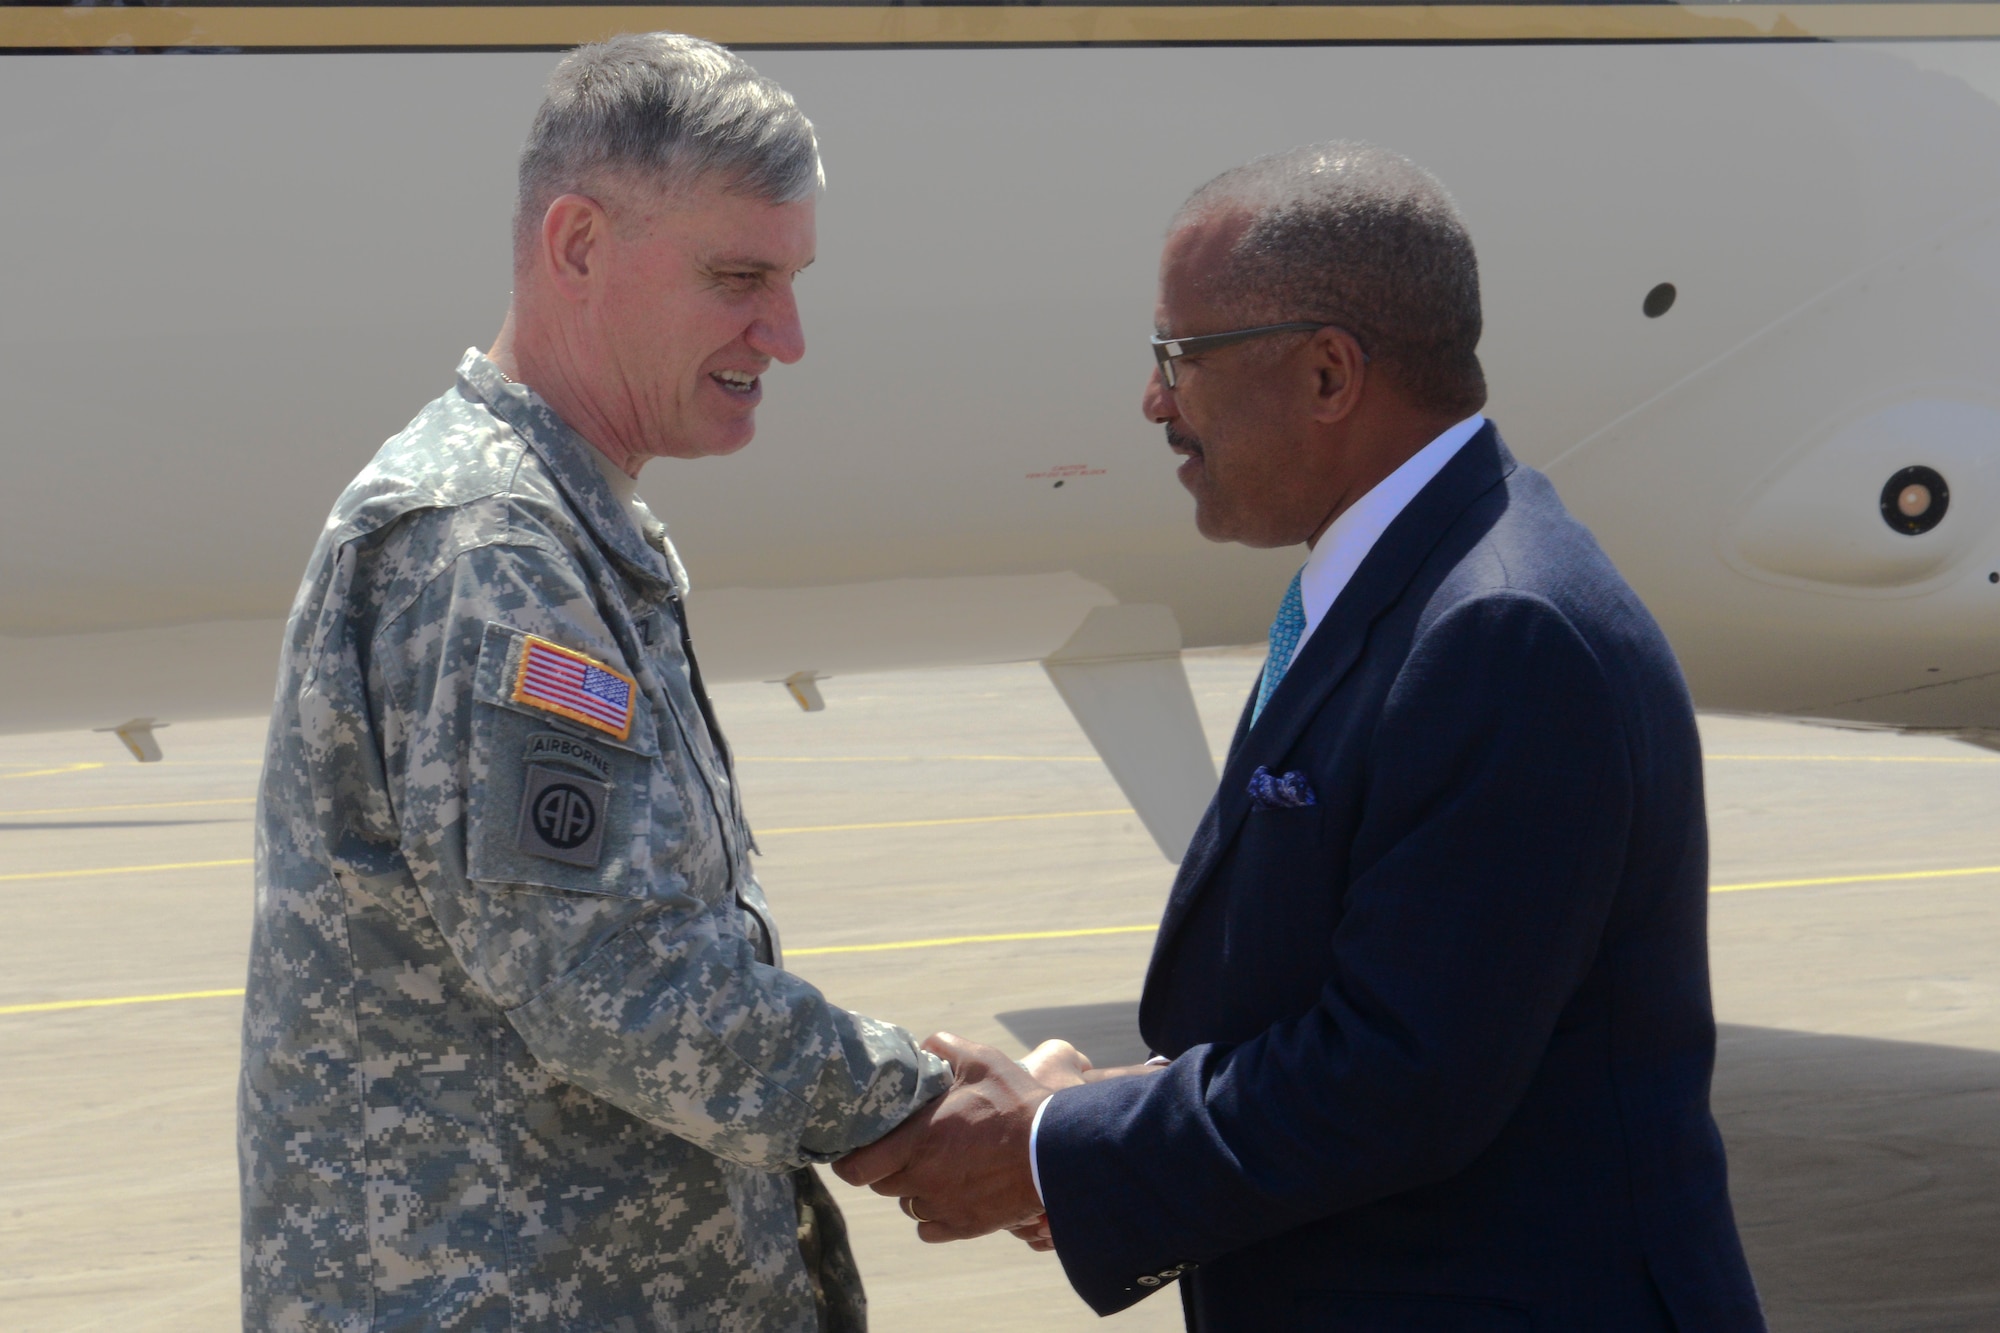 U.S. Army Gen. David Rodriguez, African Command commander, is greeted by Dwight Bush, U.S. Ambassador to the Kingdom of Morocco, at Ben Guerir Air Base, Morocco, May 20, 2015. Rodriguez received a base tour and an briefing on Exercise African Lion air training exercise. Exercise African Lion is a U.S. Marine Corps led event with participation from the U.S. Army, German Armed Forces, British Armed Forces, Netherlands, Belgium, Senegal and Tunisia.. (U.S. Air Force photo by Staff Sgt. Eboni Reams/Released)